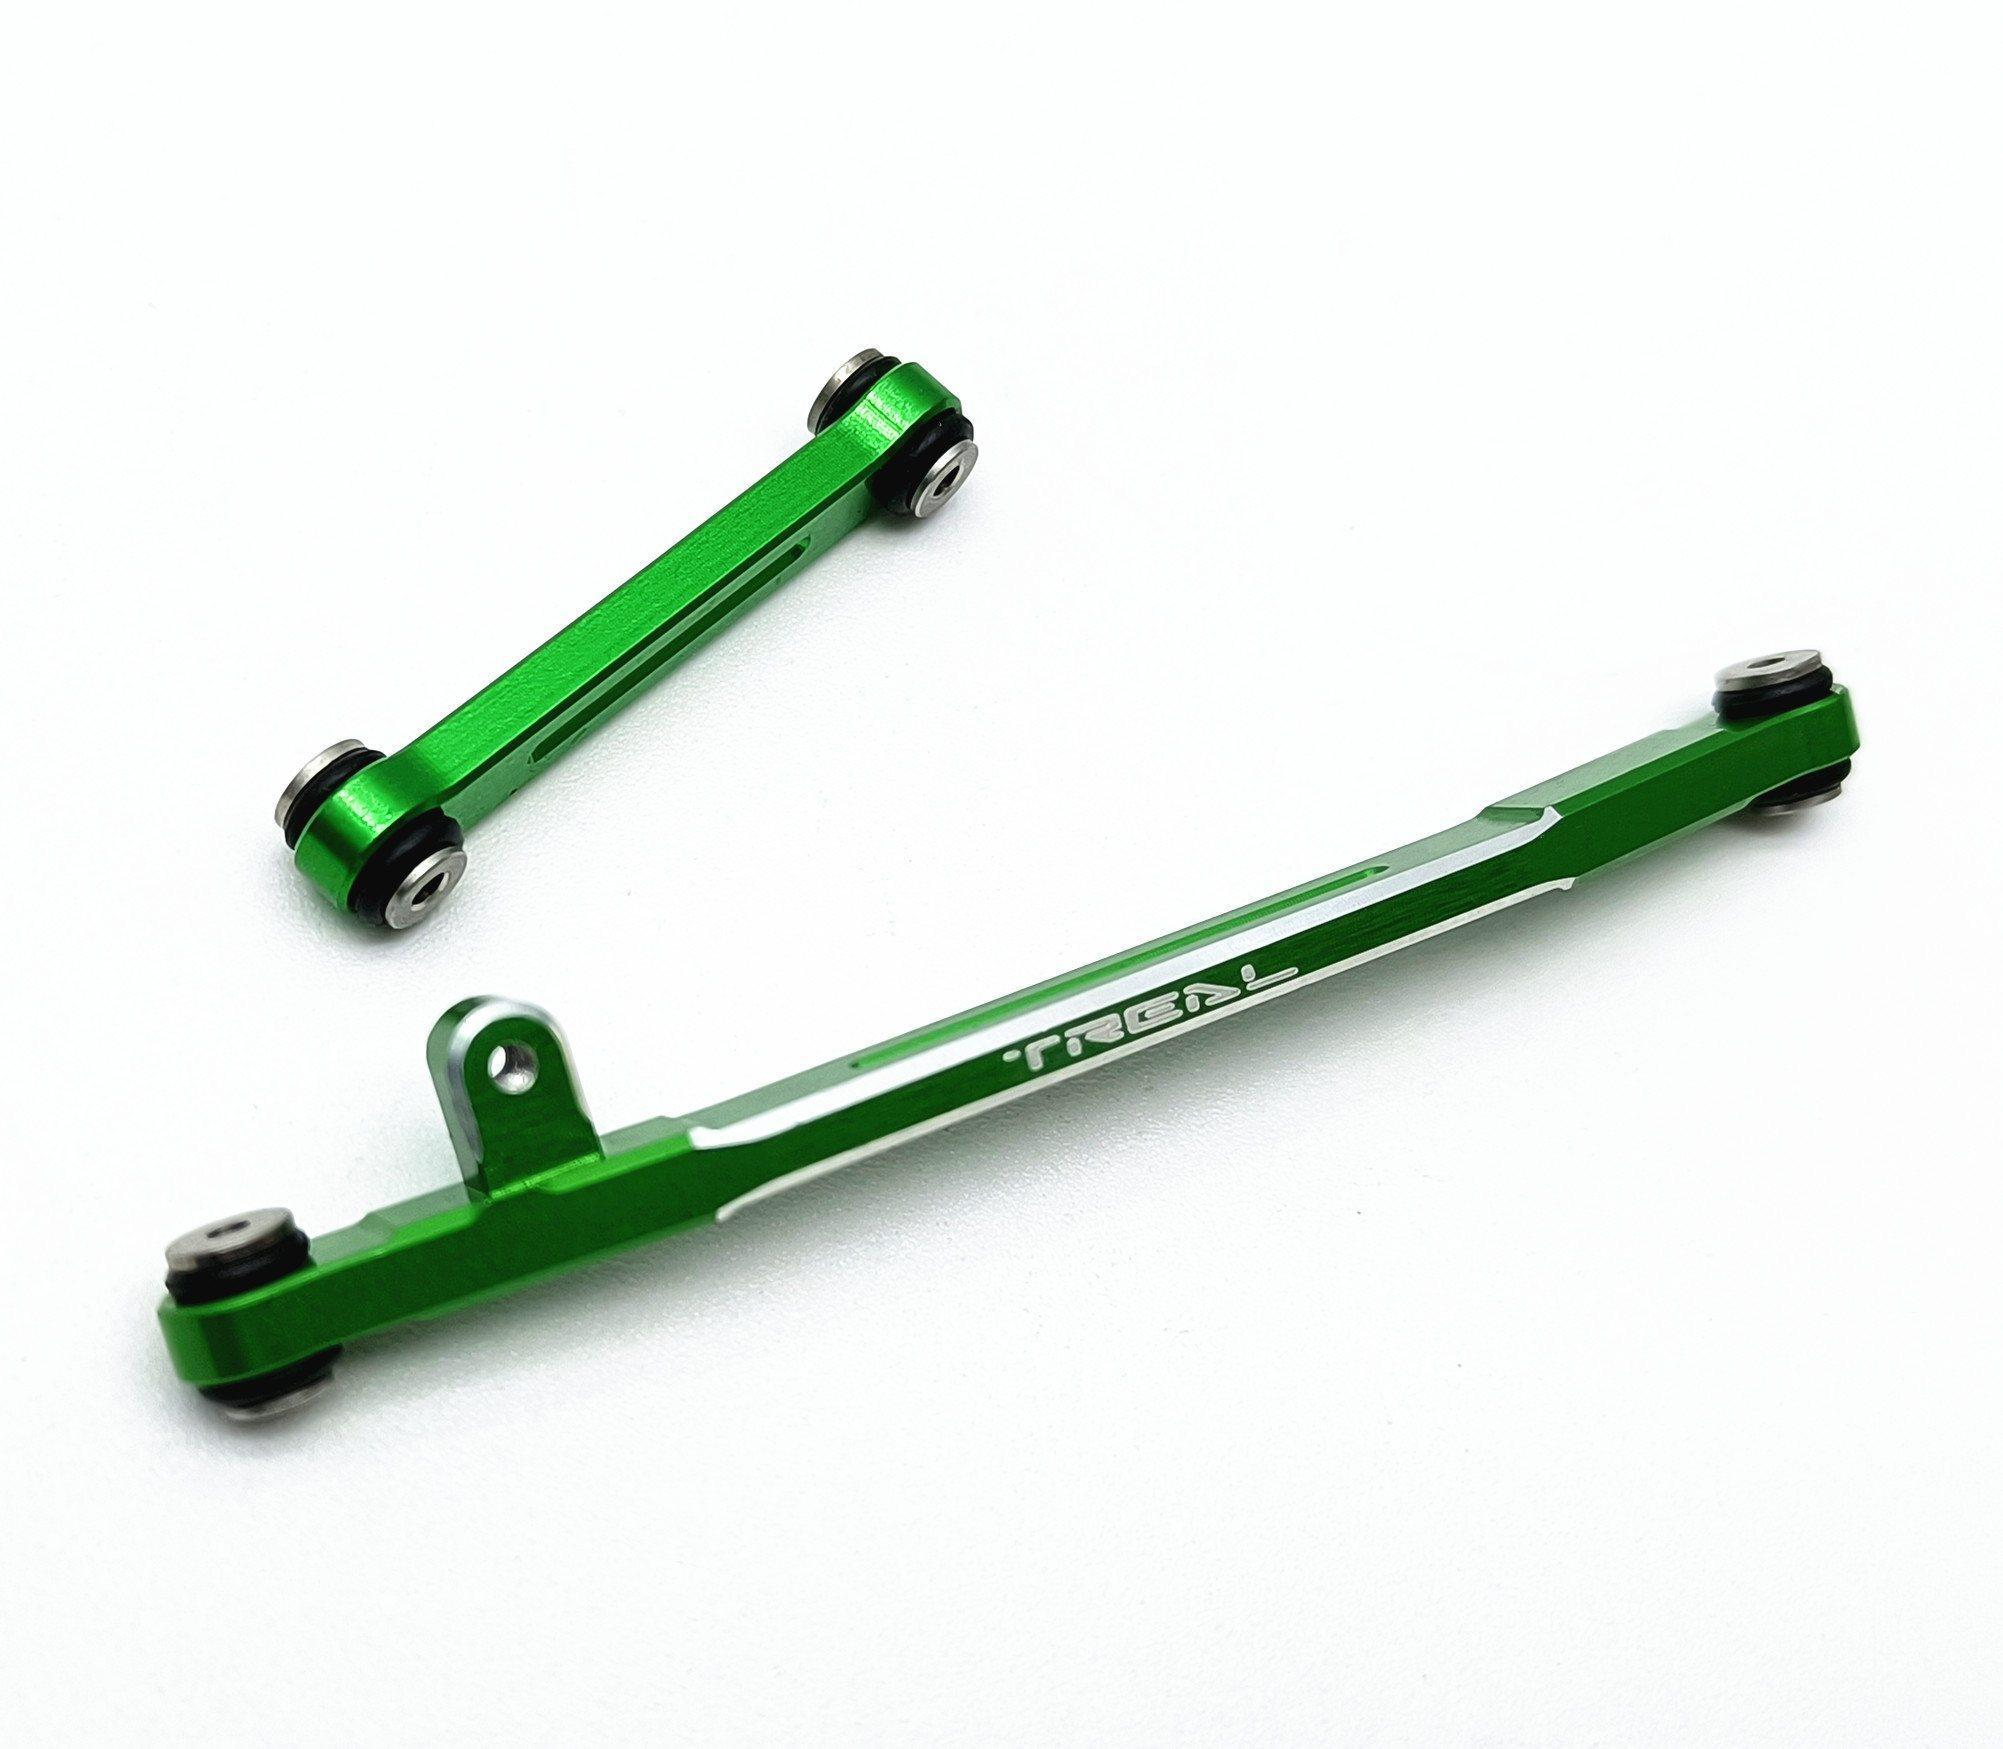 Treal Aluminum 7075 Steering Links Set for Axial SCX24 1/24 Scale-V2 (Green)